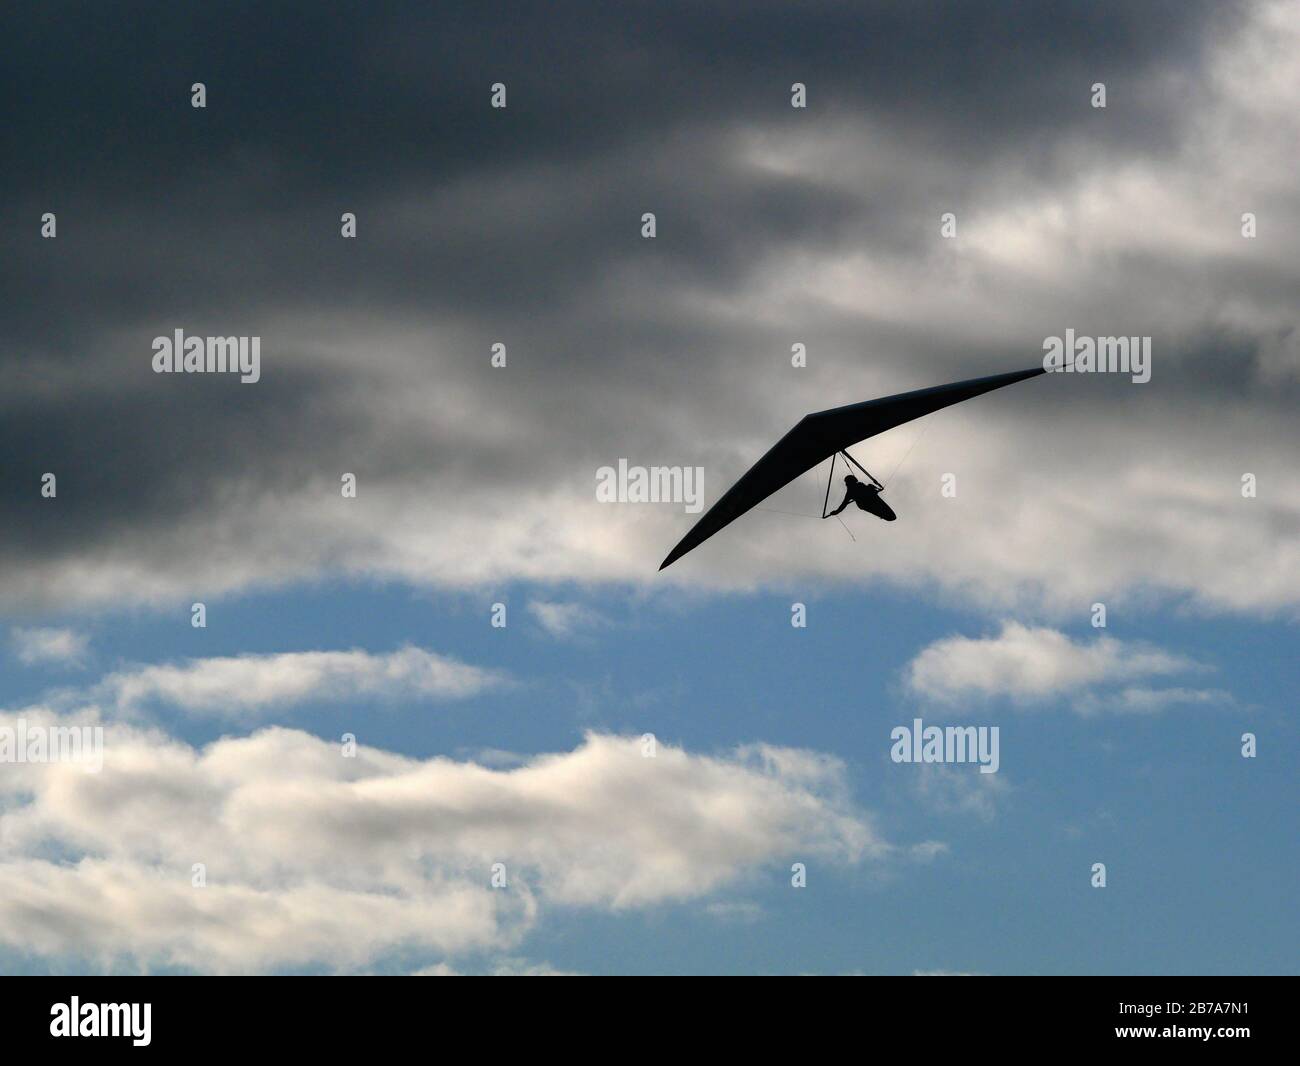 Hang glider silhouetted against clouds Stock Photo